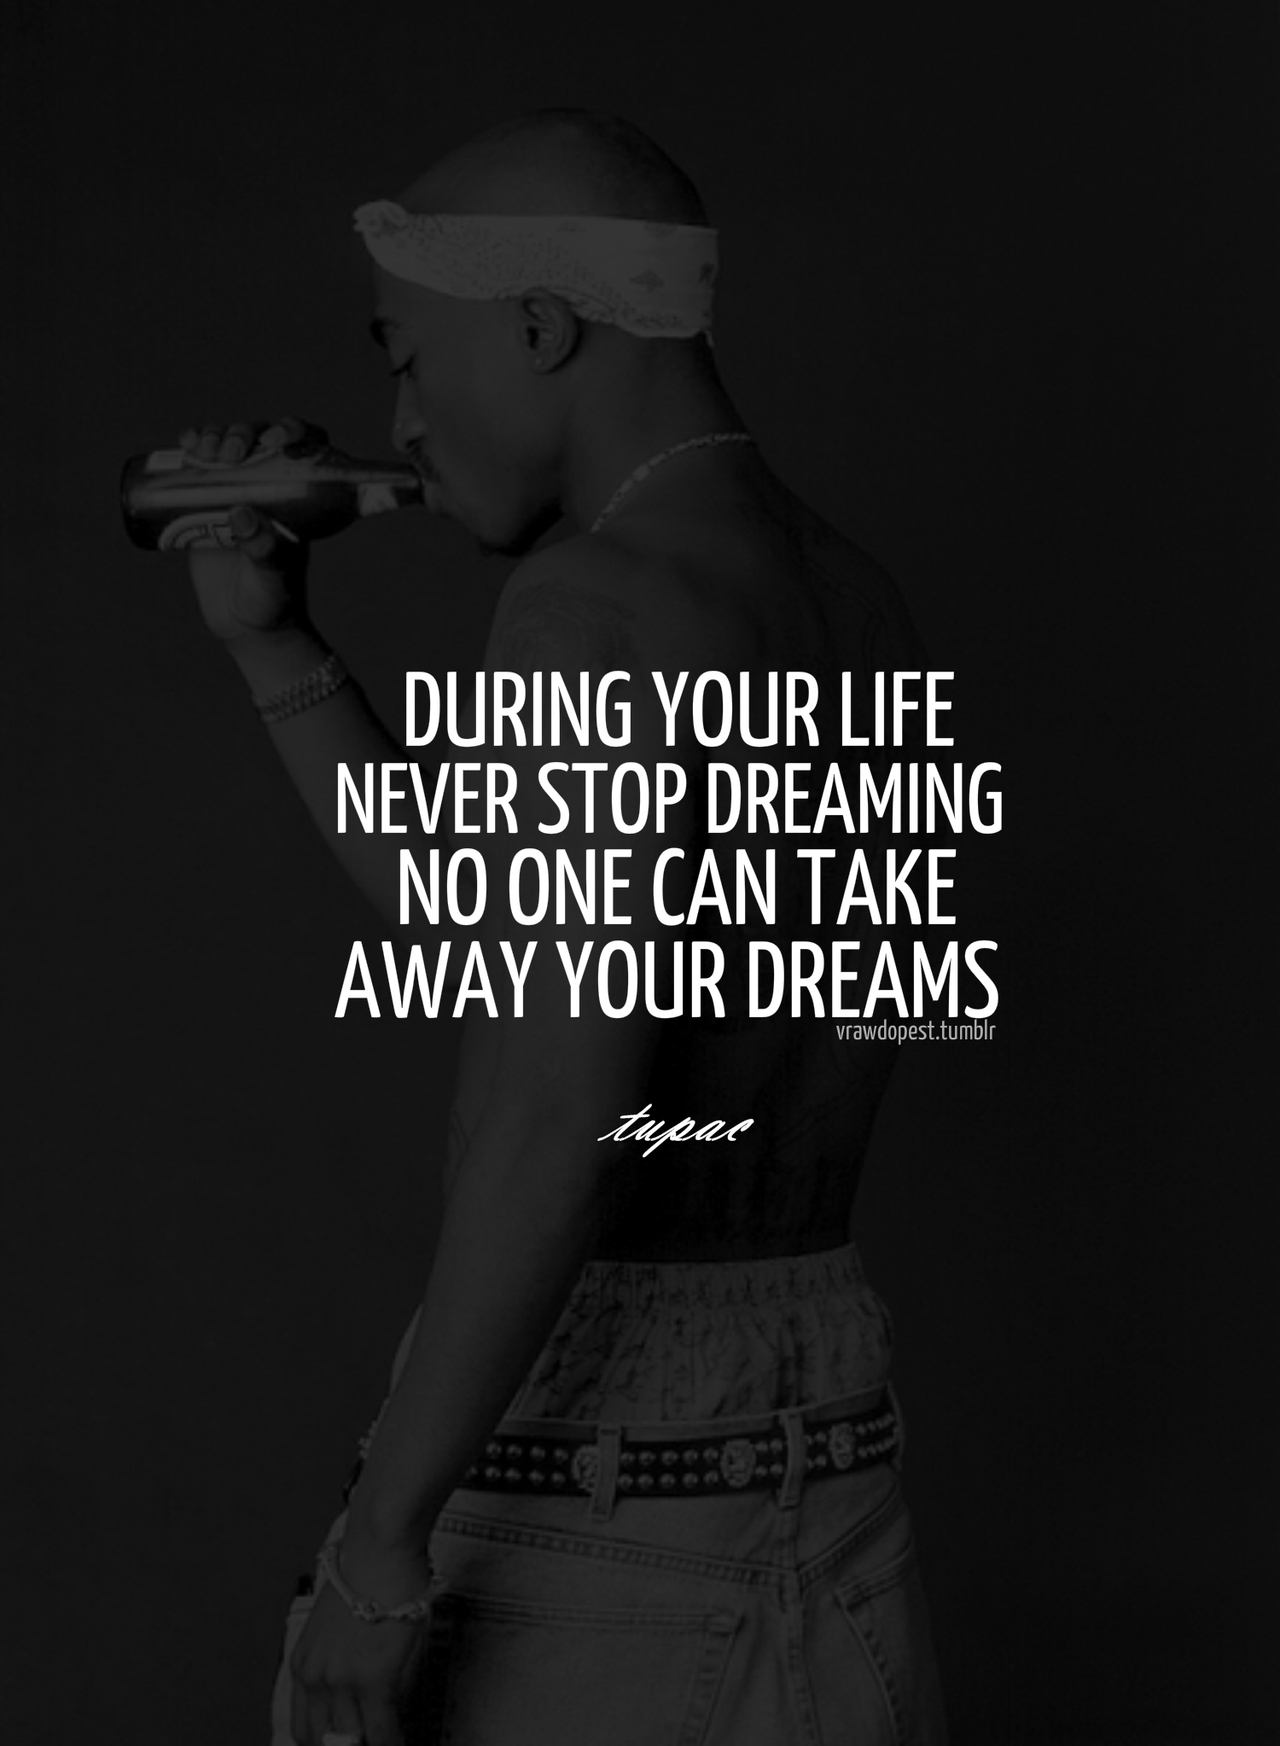 Take him away. Never stop Dreaming your Life.